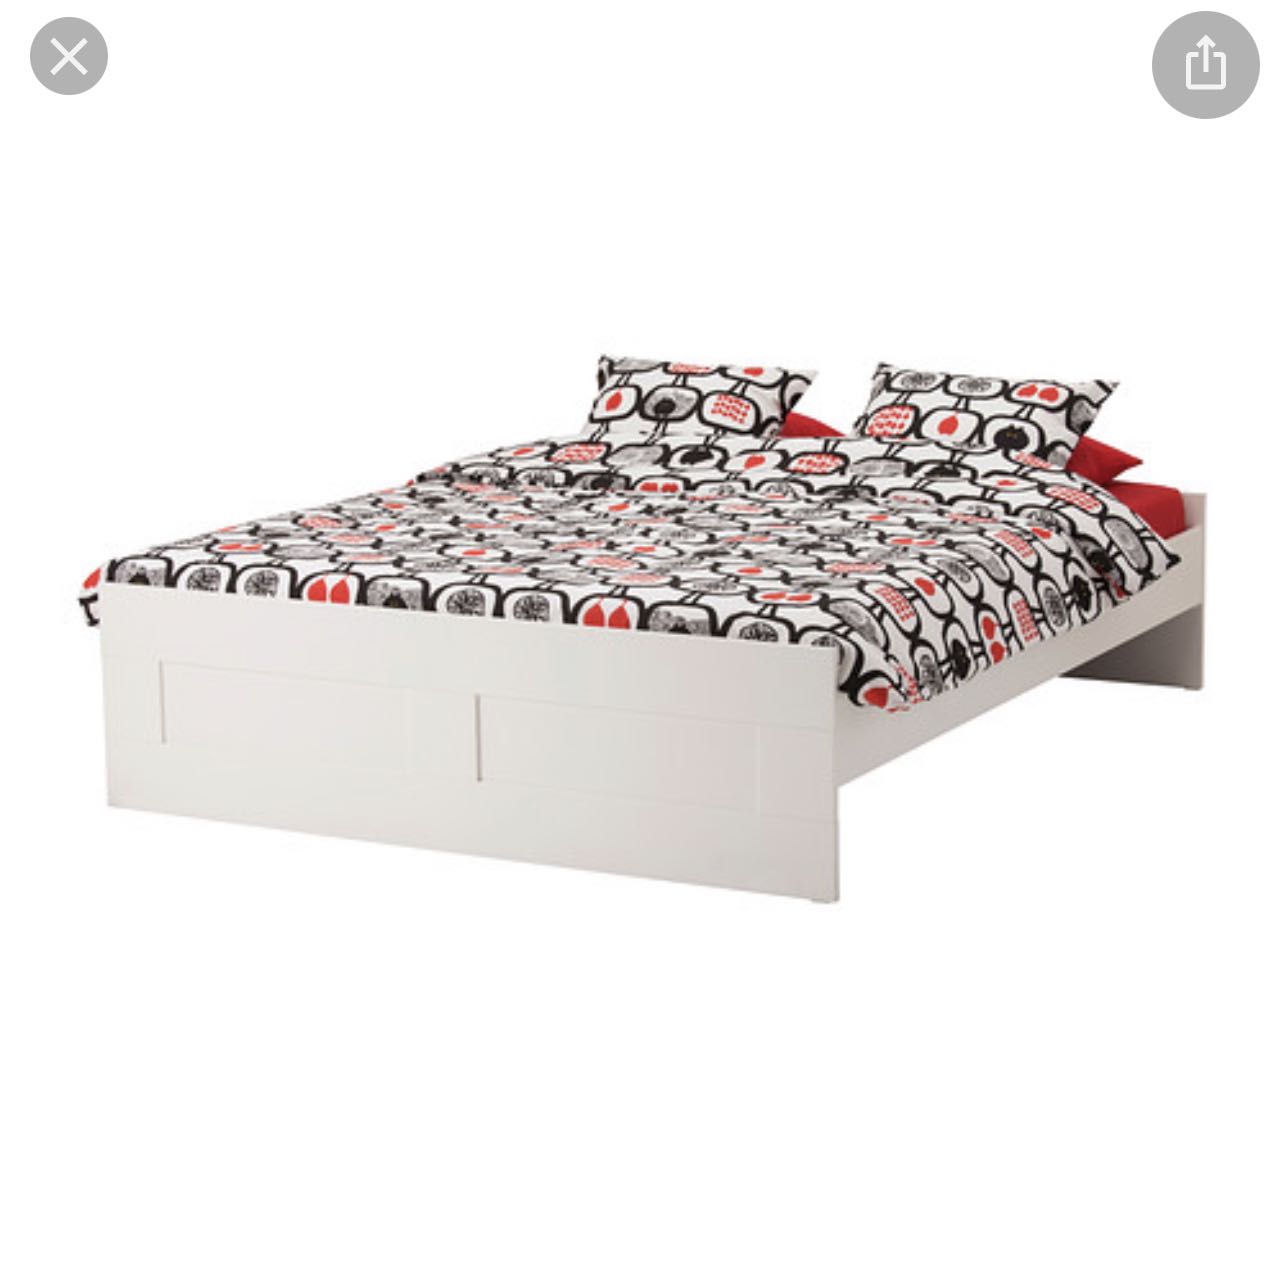 Ikea Brimnes Bed Frame Without Storage, Bed Frame No Headboard Ikea